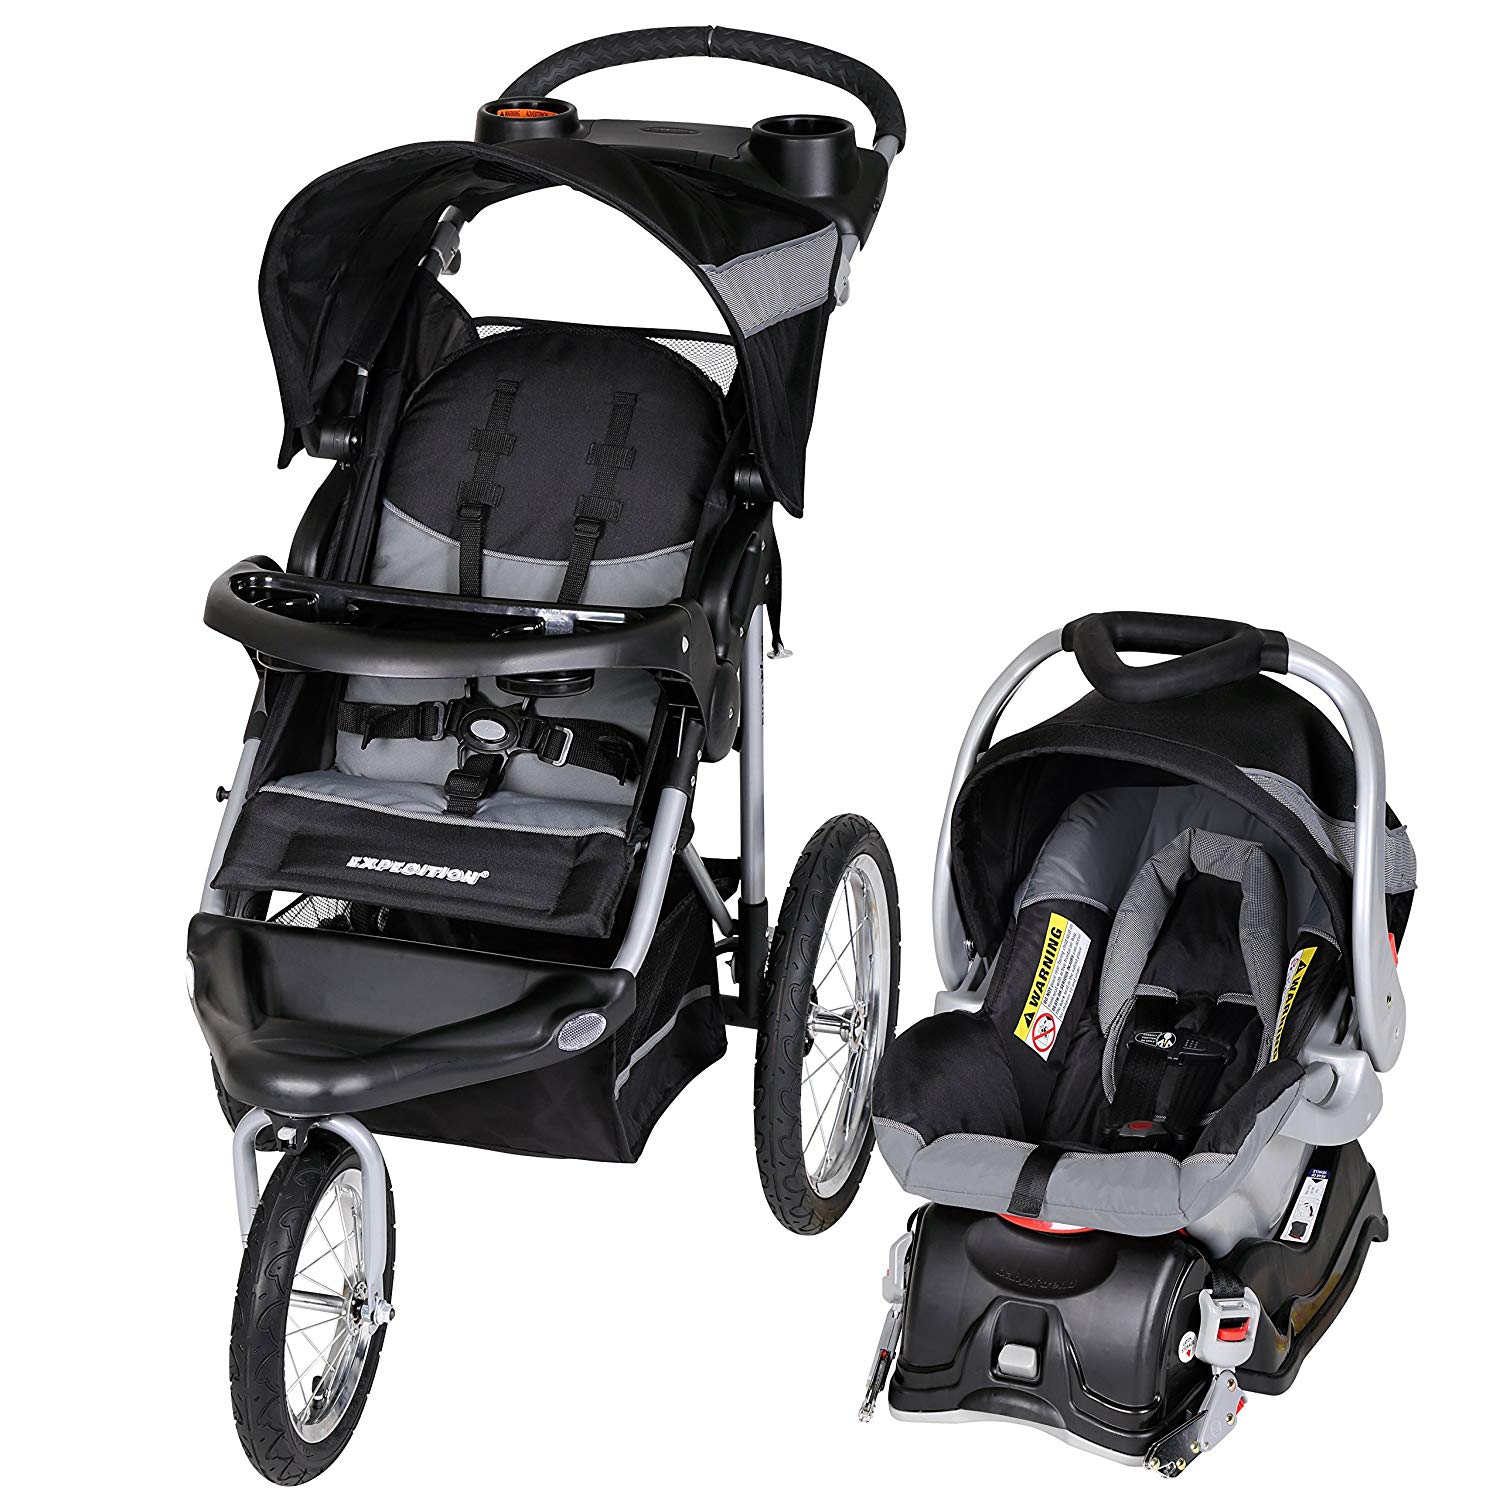 Review of Baby Trend Expedition Jogger Travel System, Millennium White